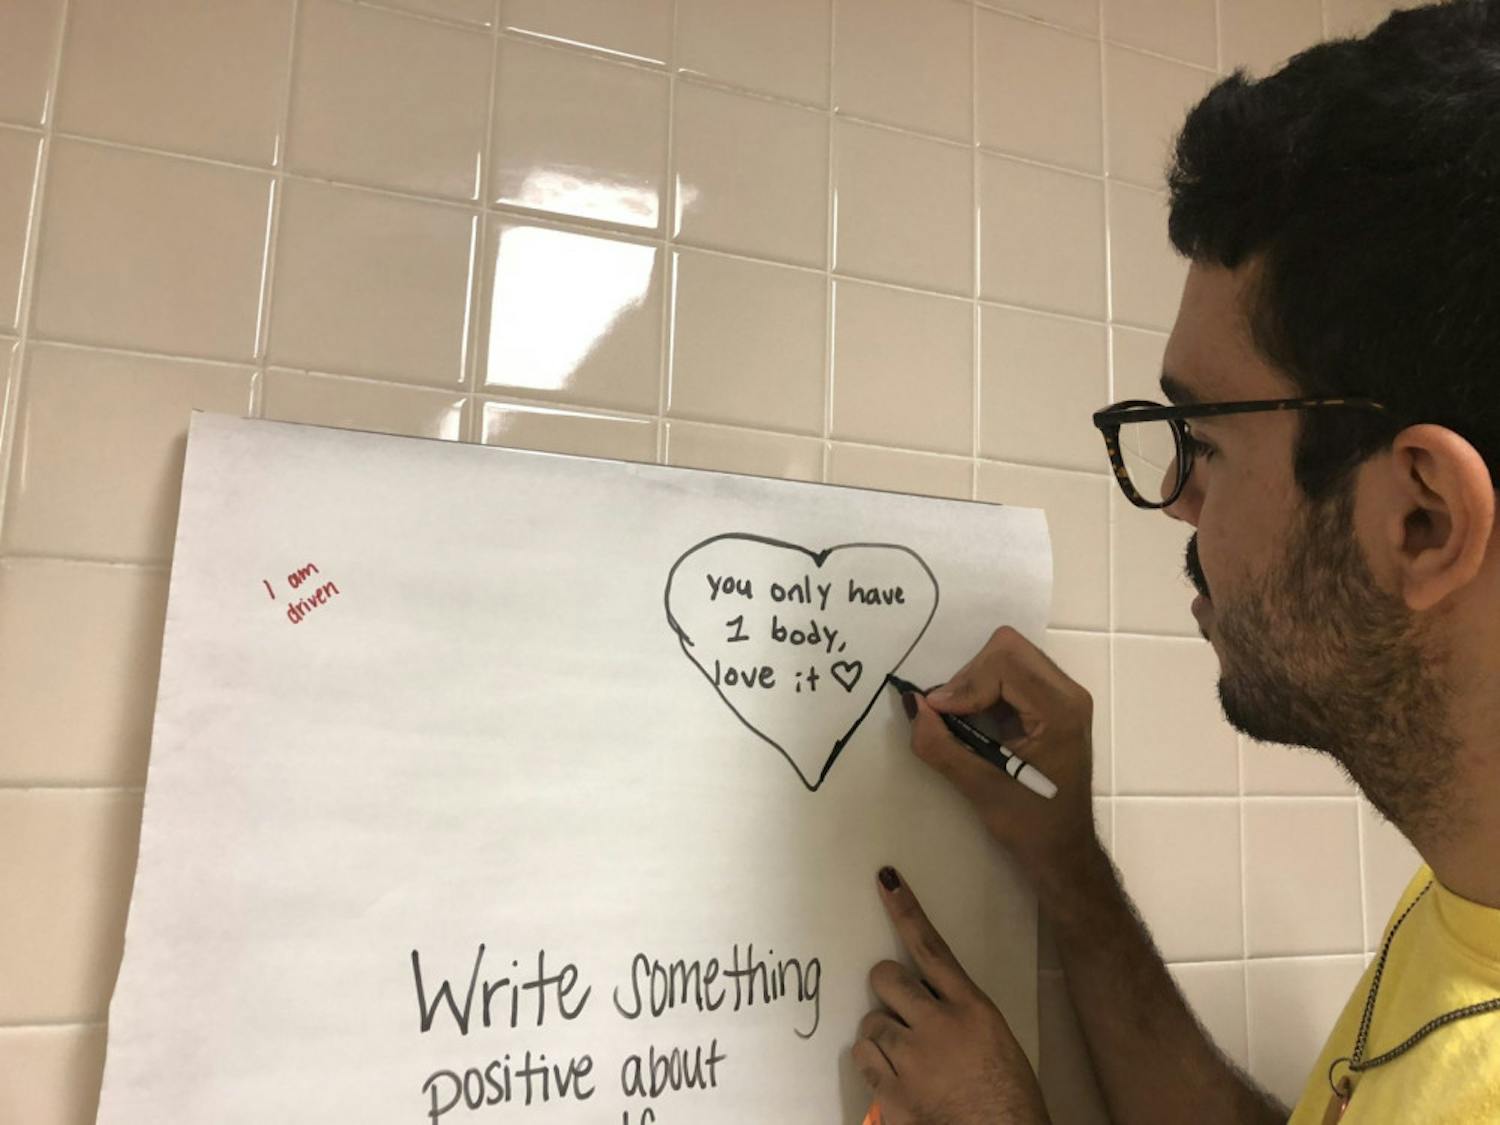 Anthony Flores, a 20-year-old UF visual art studies&nbsp;sophomore, traces a heart around a message they wrote.&nbsp;
&nbsp;
&nbsp;